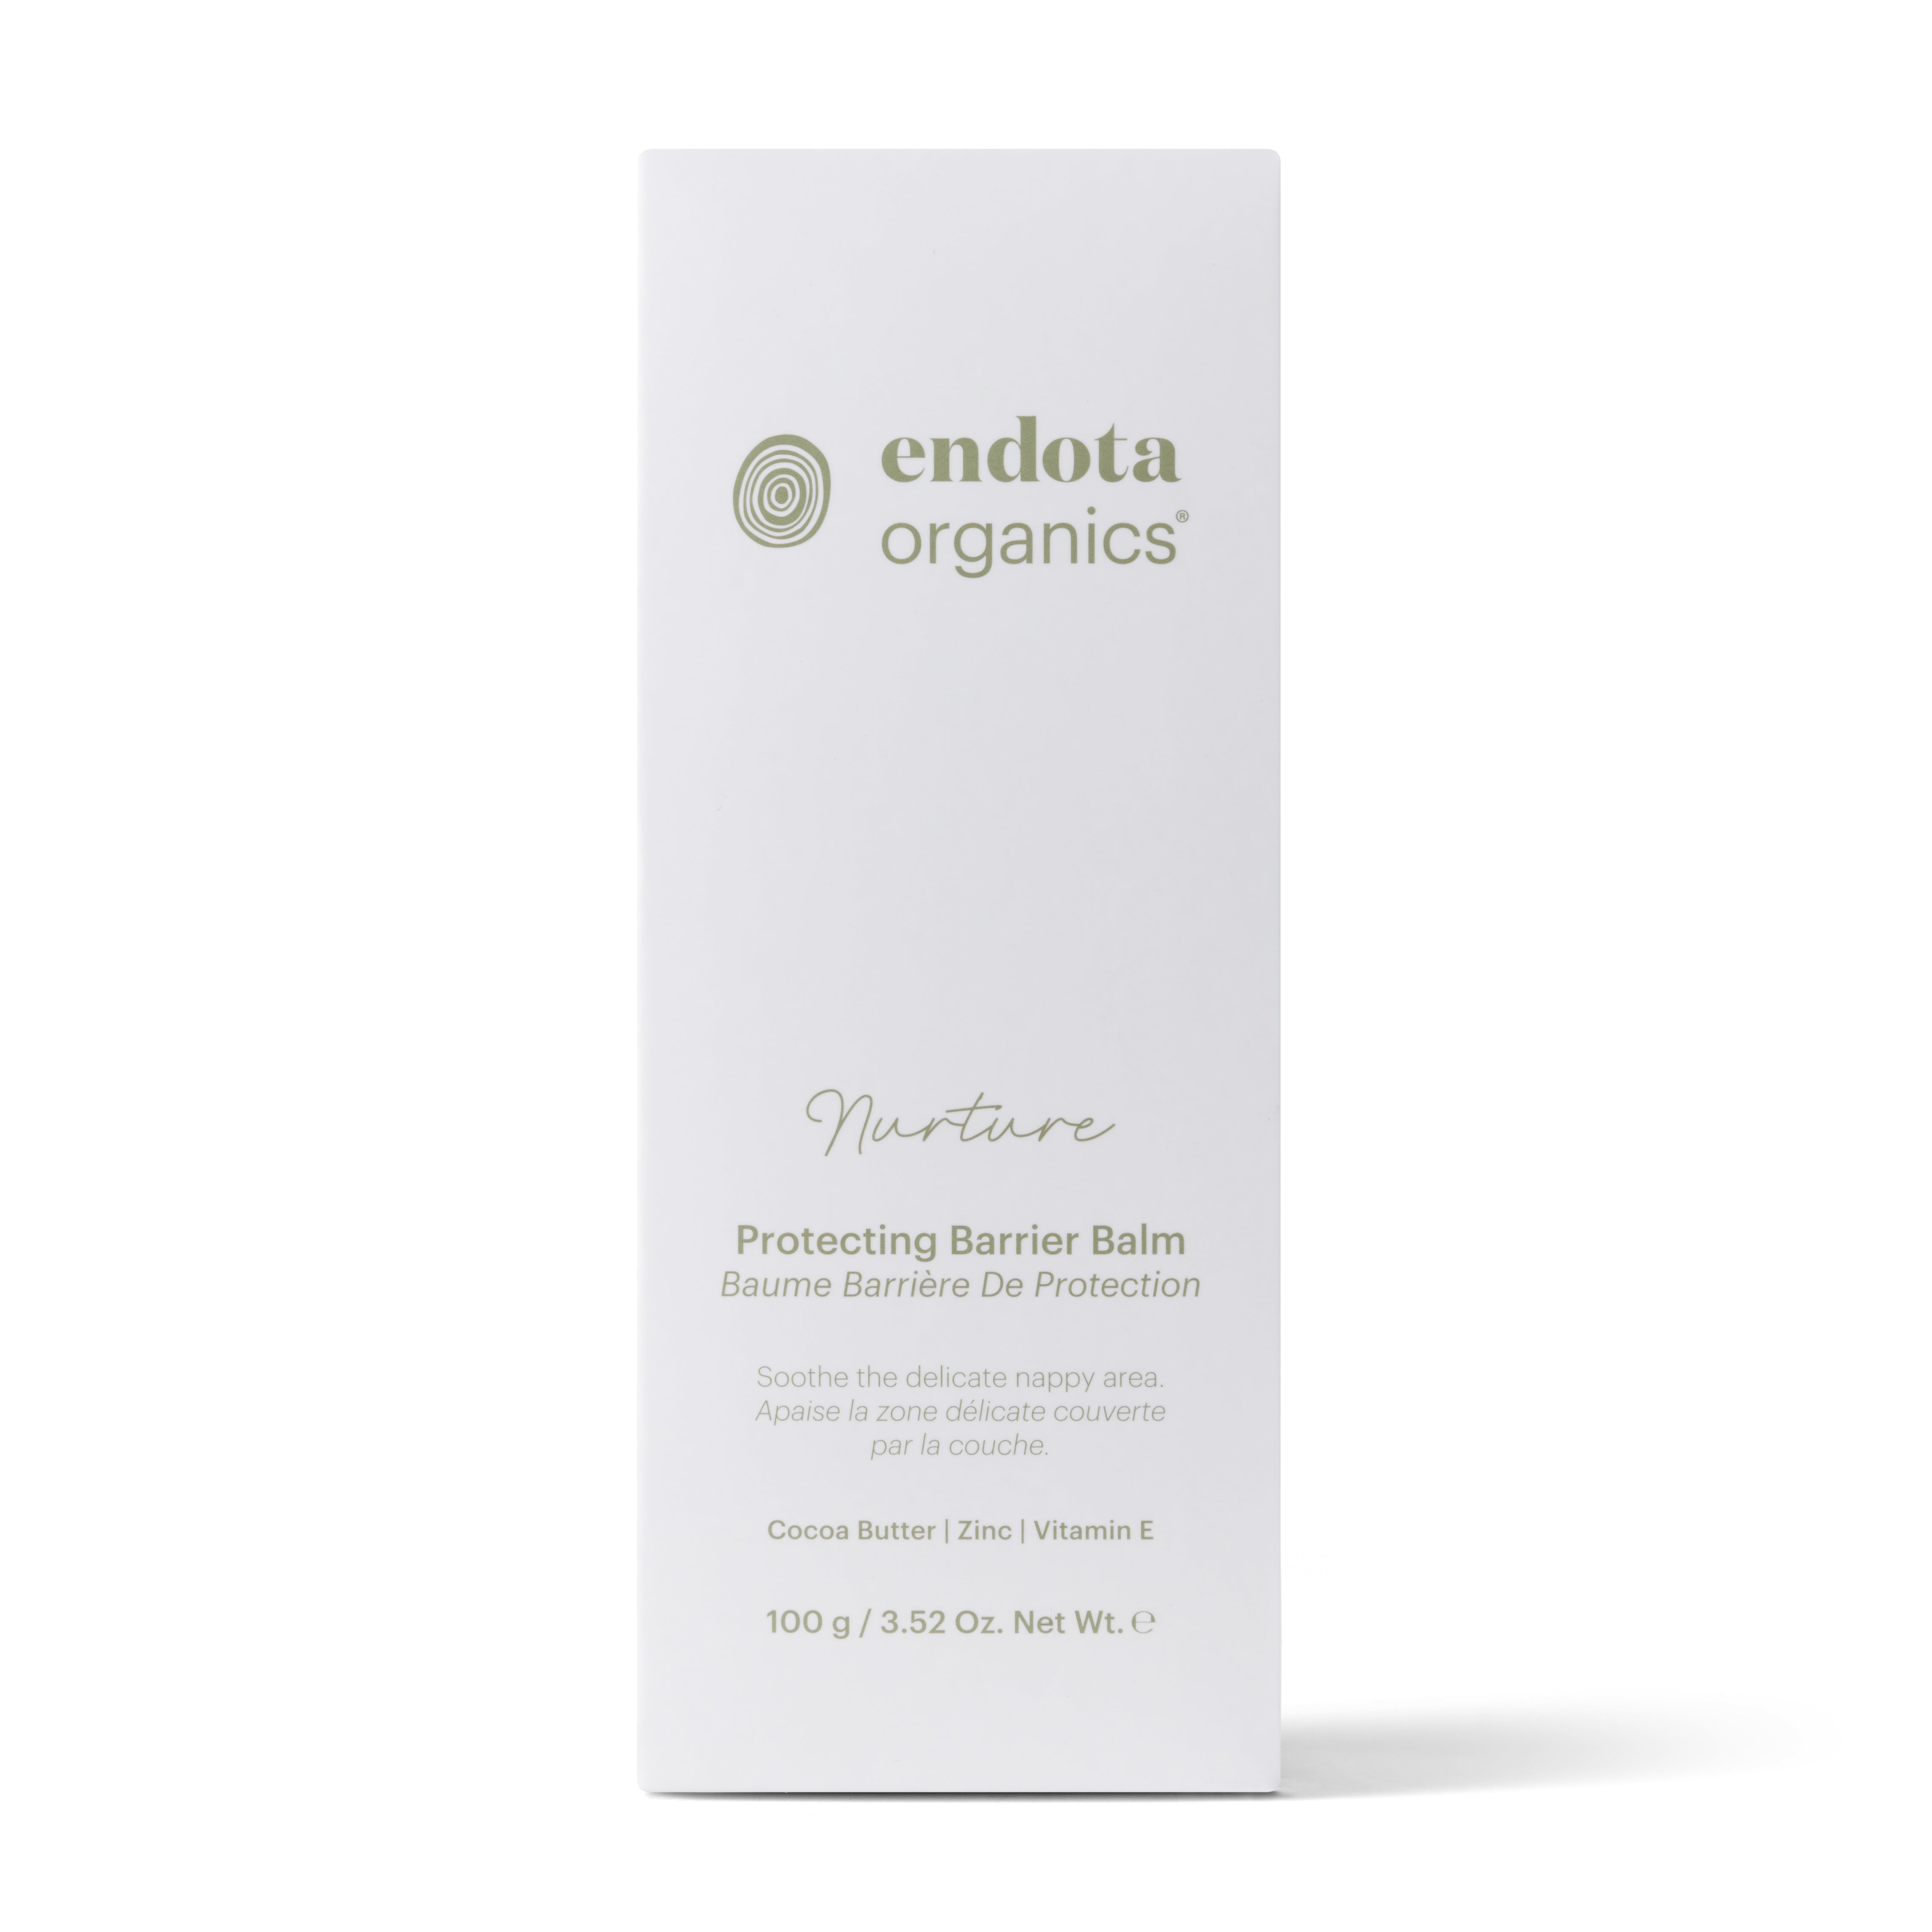 Endota Protecting Barrier Balm | Buy at The Green Collective